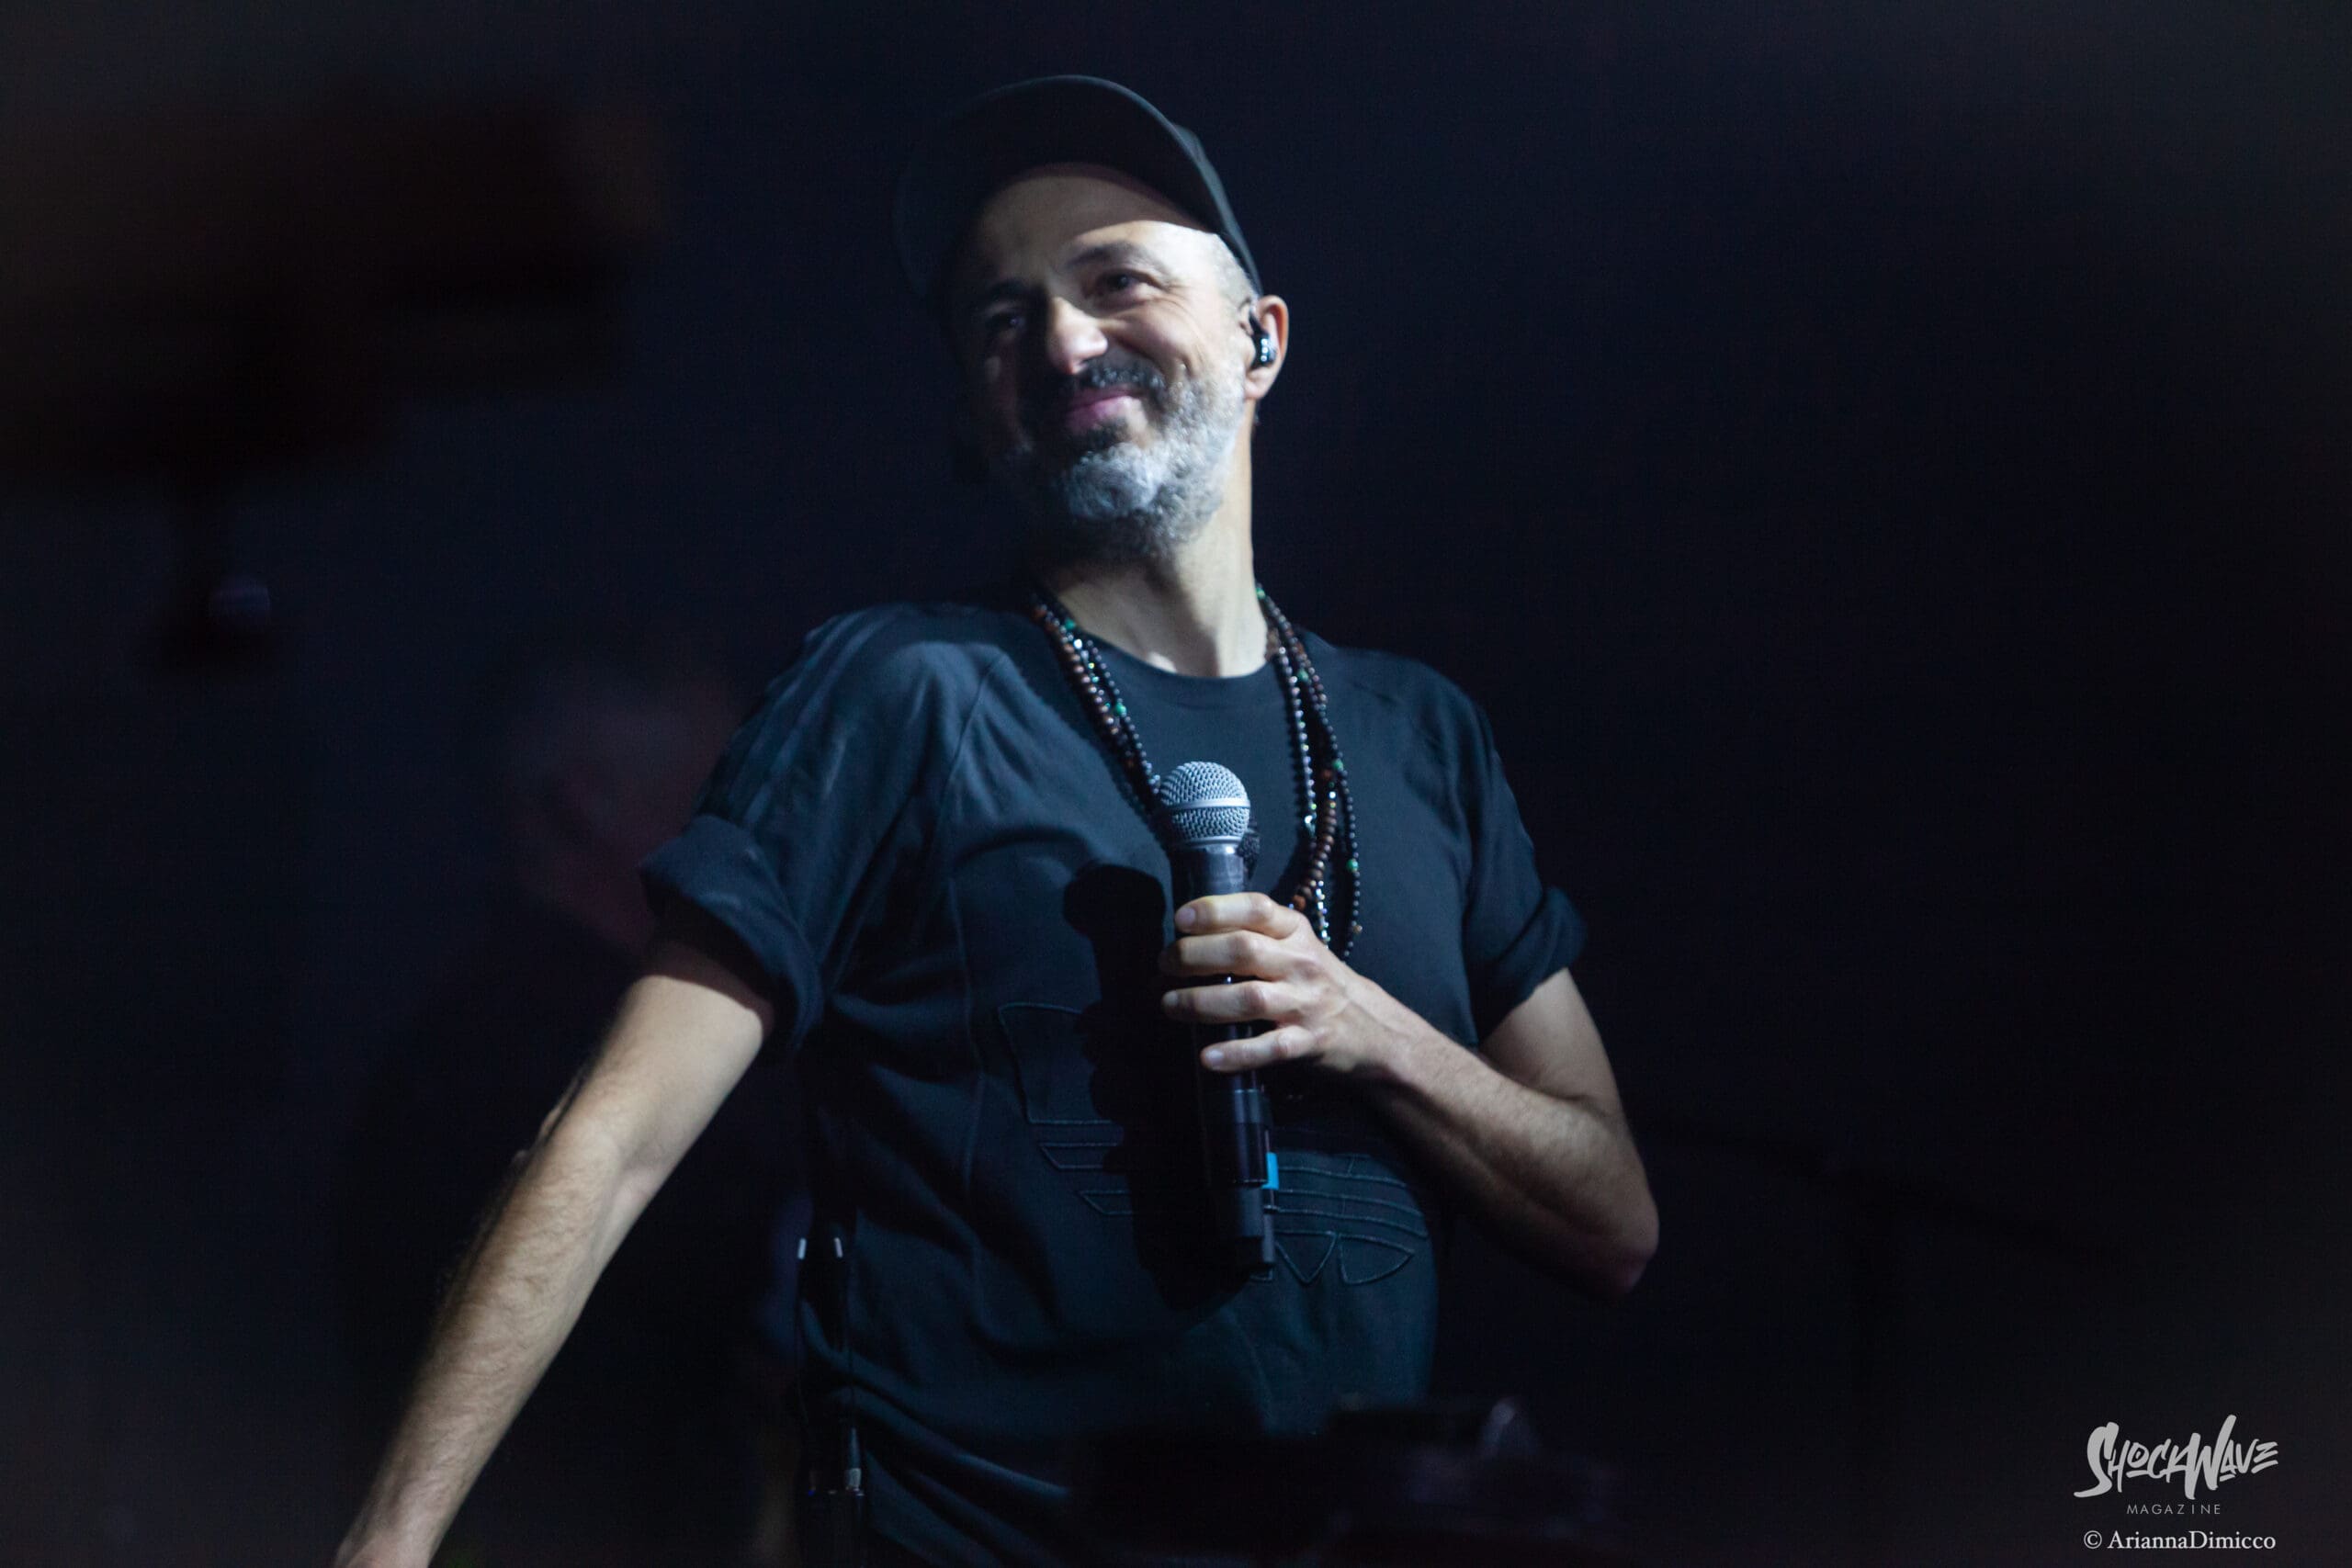 Subsonica